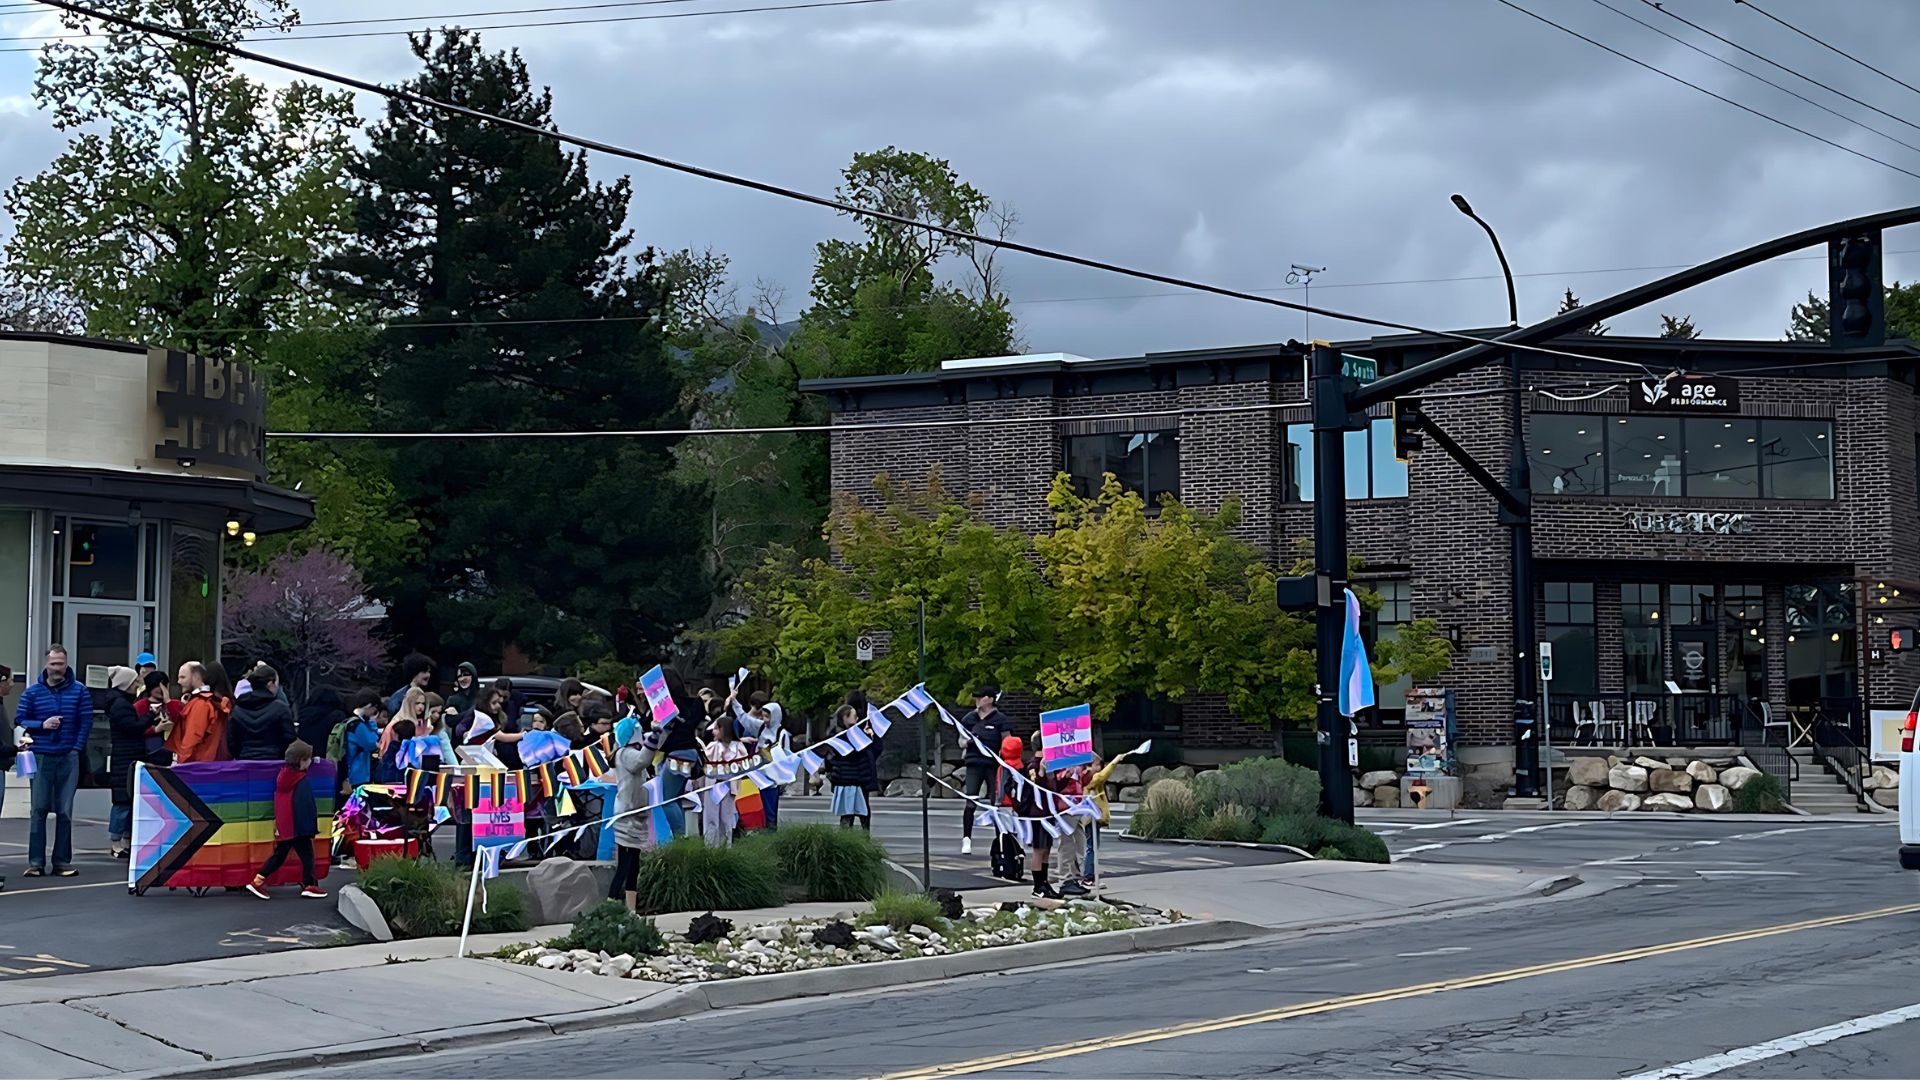 On Friday morning, parents and young students gathered near Emerson Elementary School to rally over...